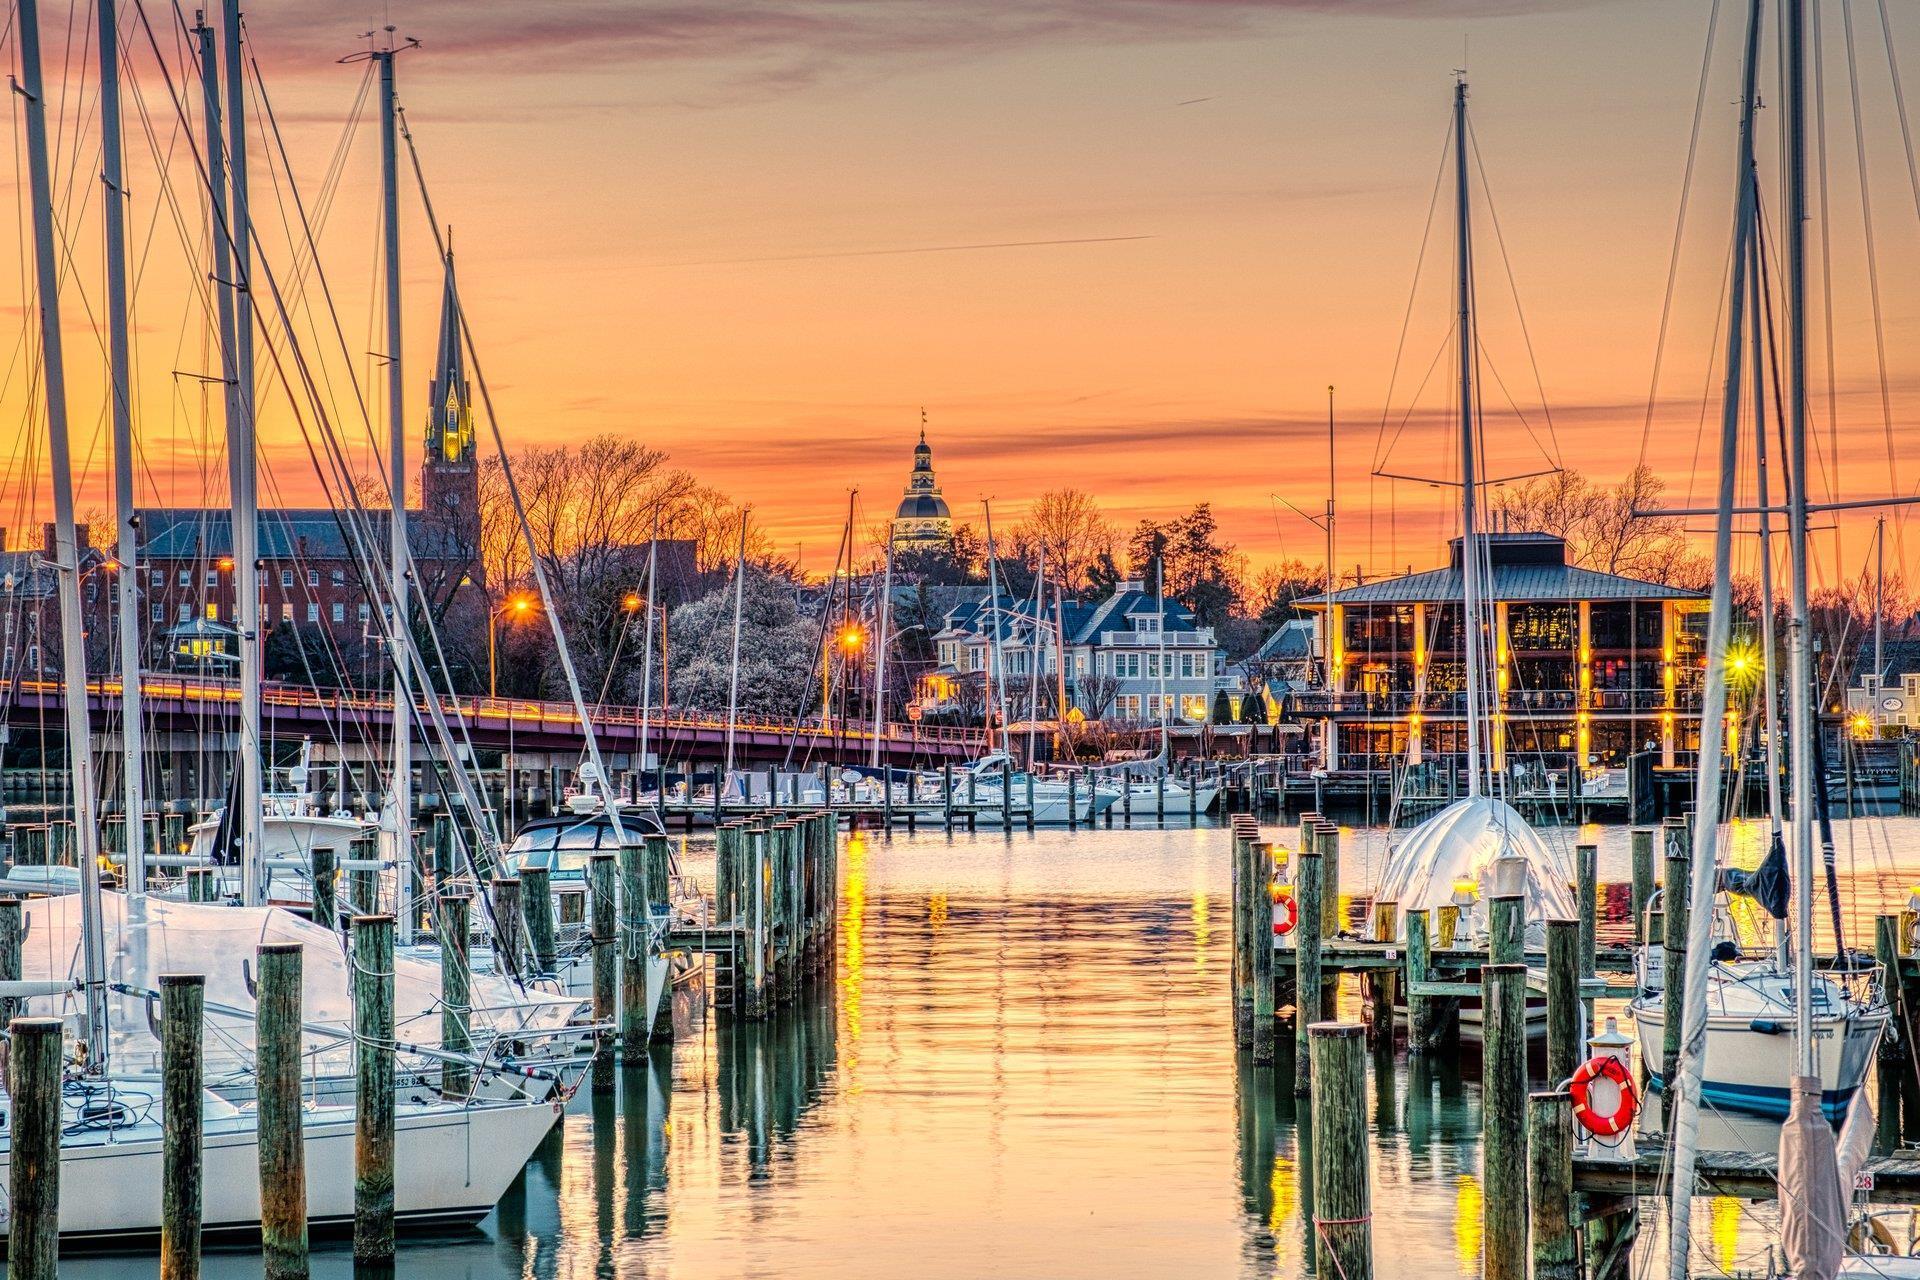 Visit Annapolis & Anne Arundel County in Annapolis, MD